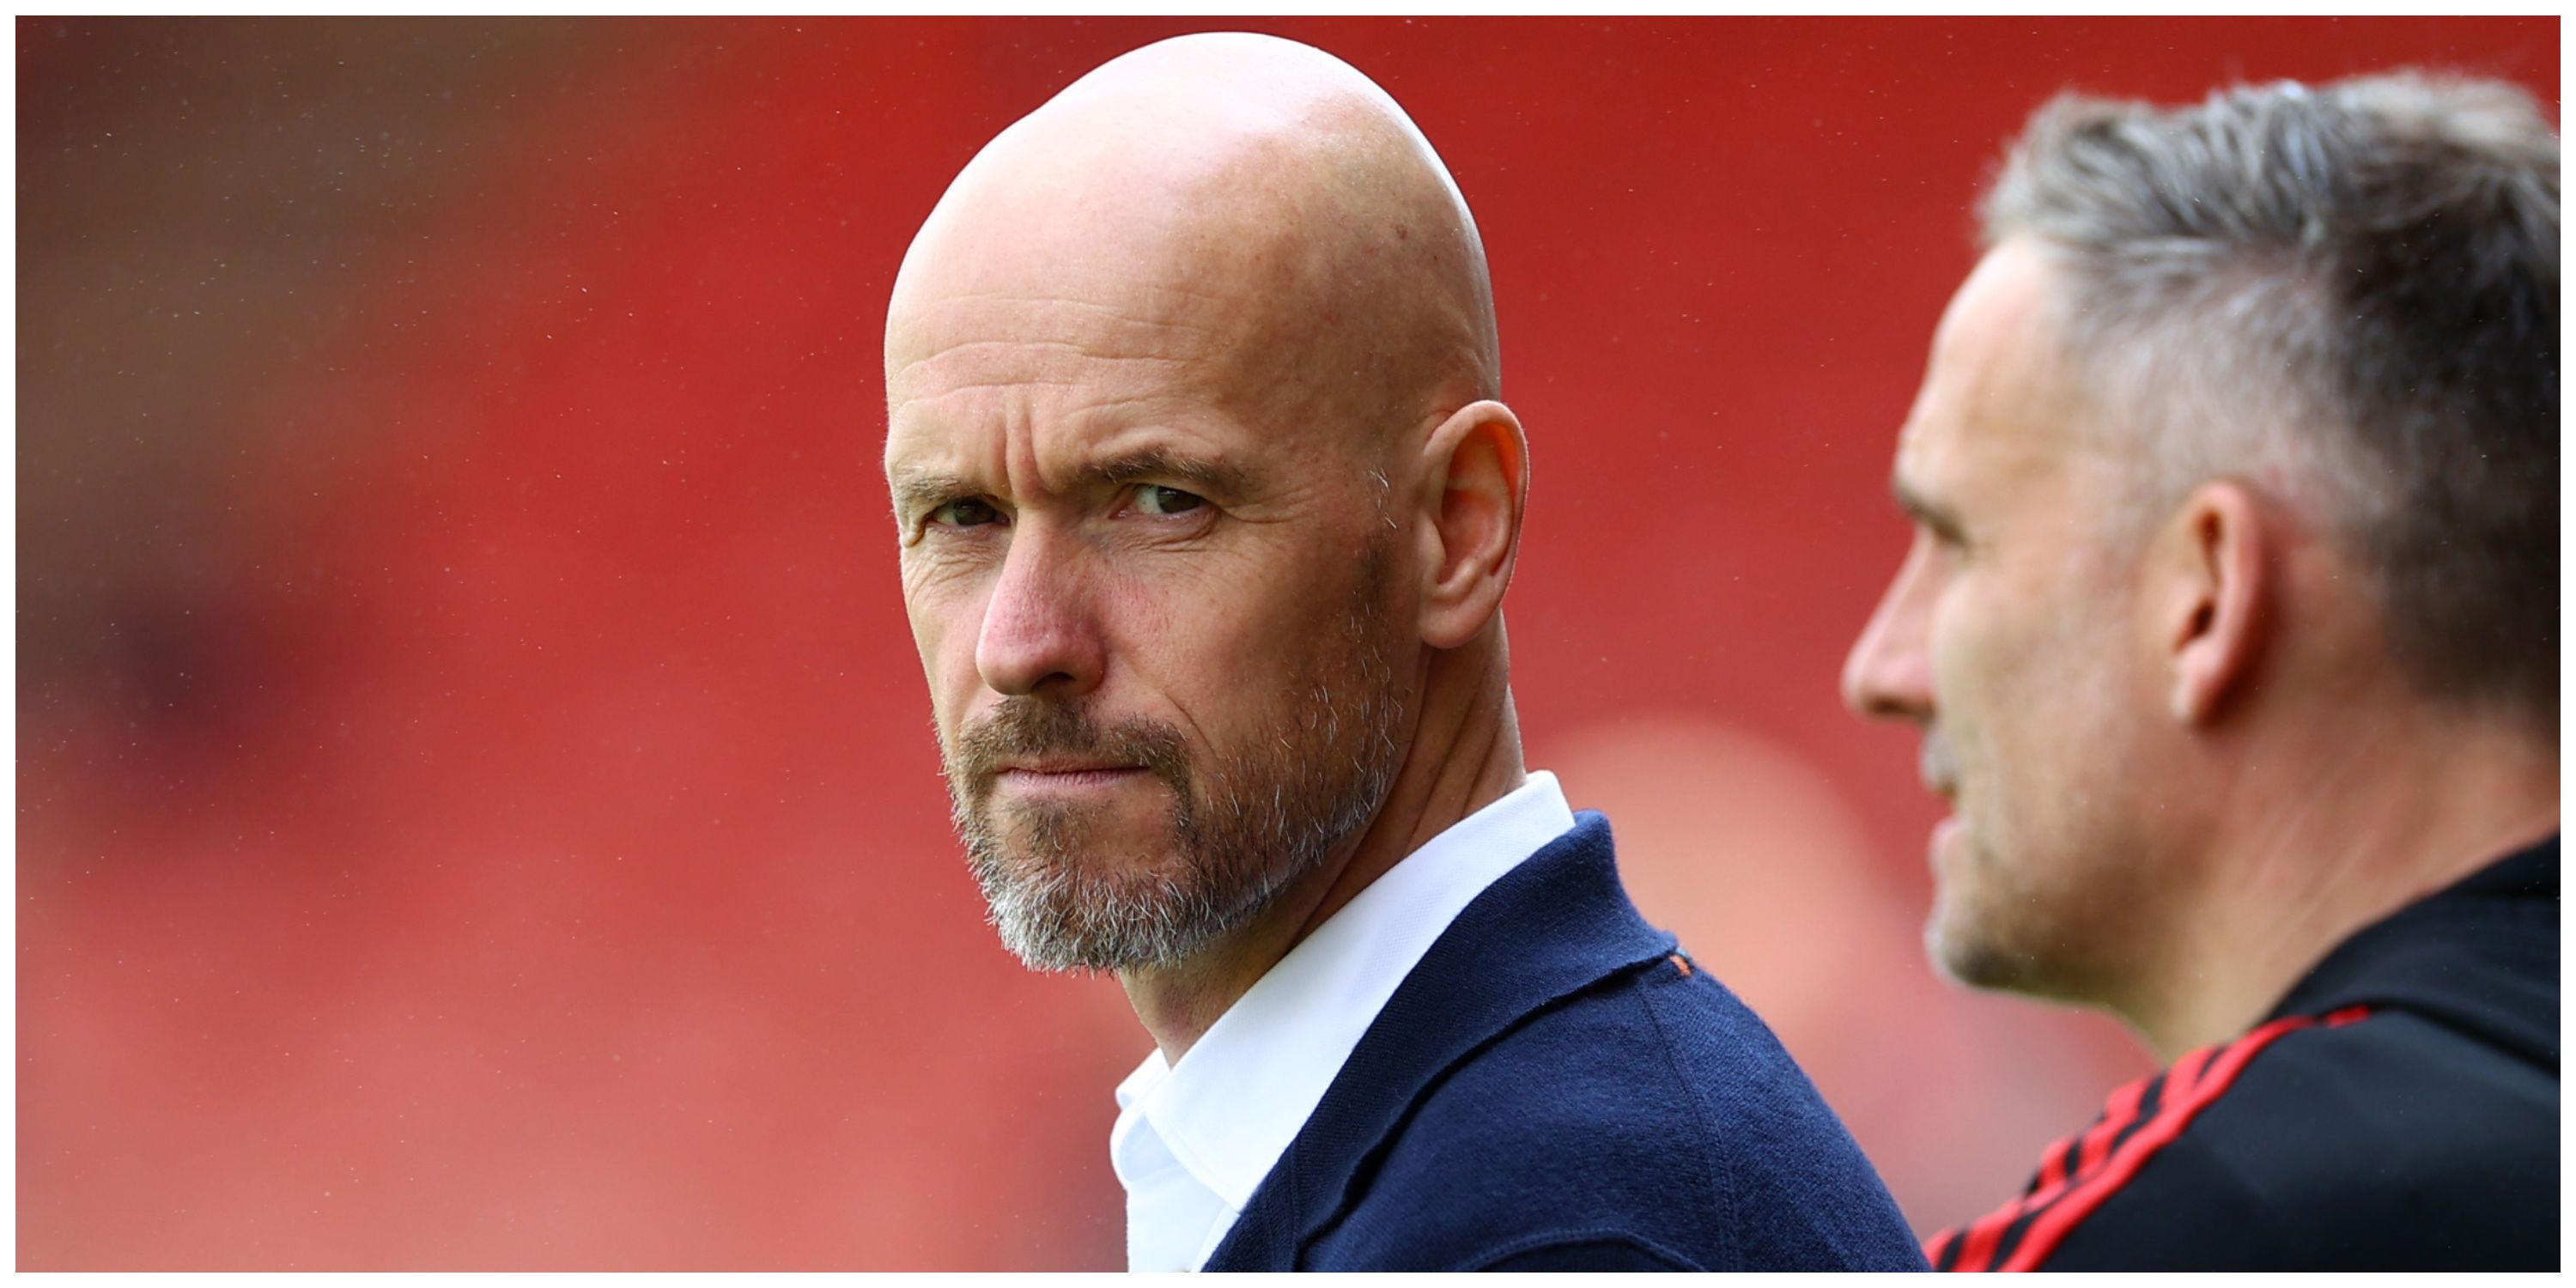 Manchester United manager Erik ten Hag looking into camera